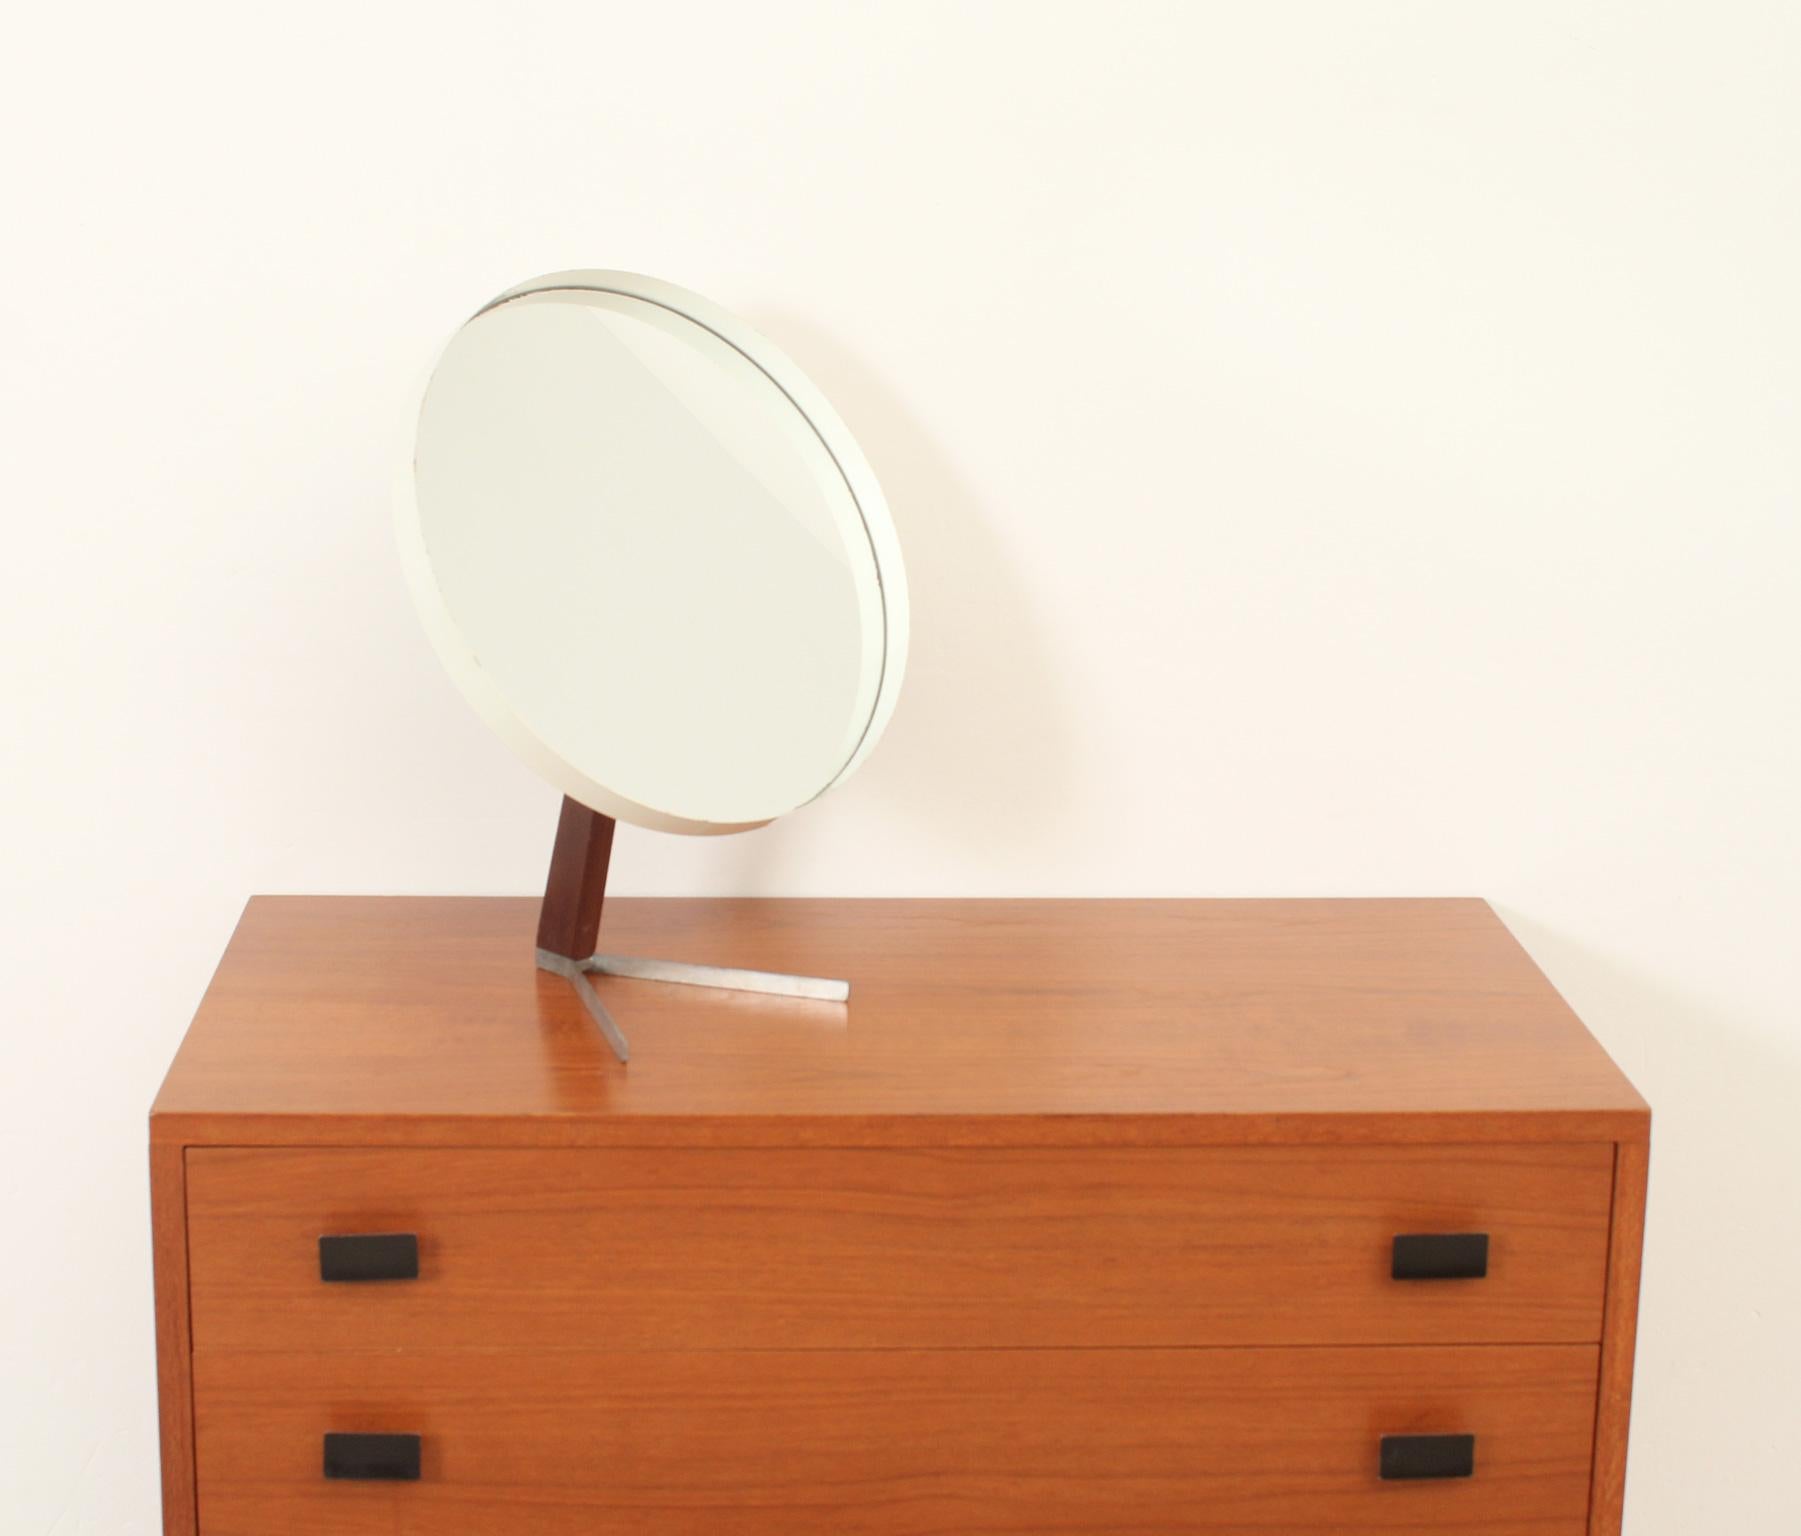 Metal Table Mirror by Robert Welch for Durlston Designs, UK, 1960s For Sale